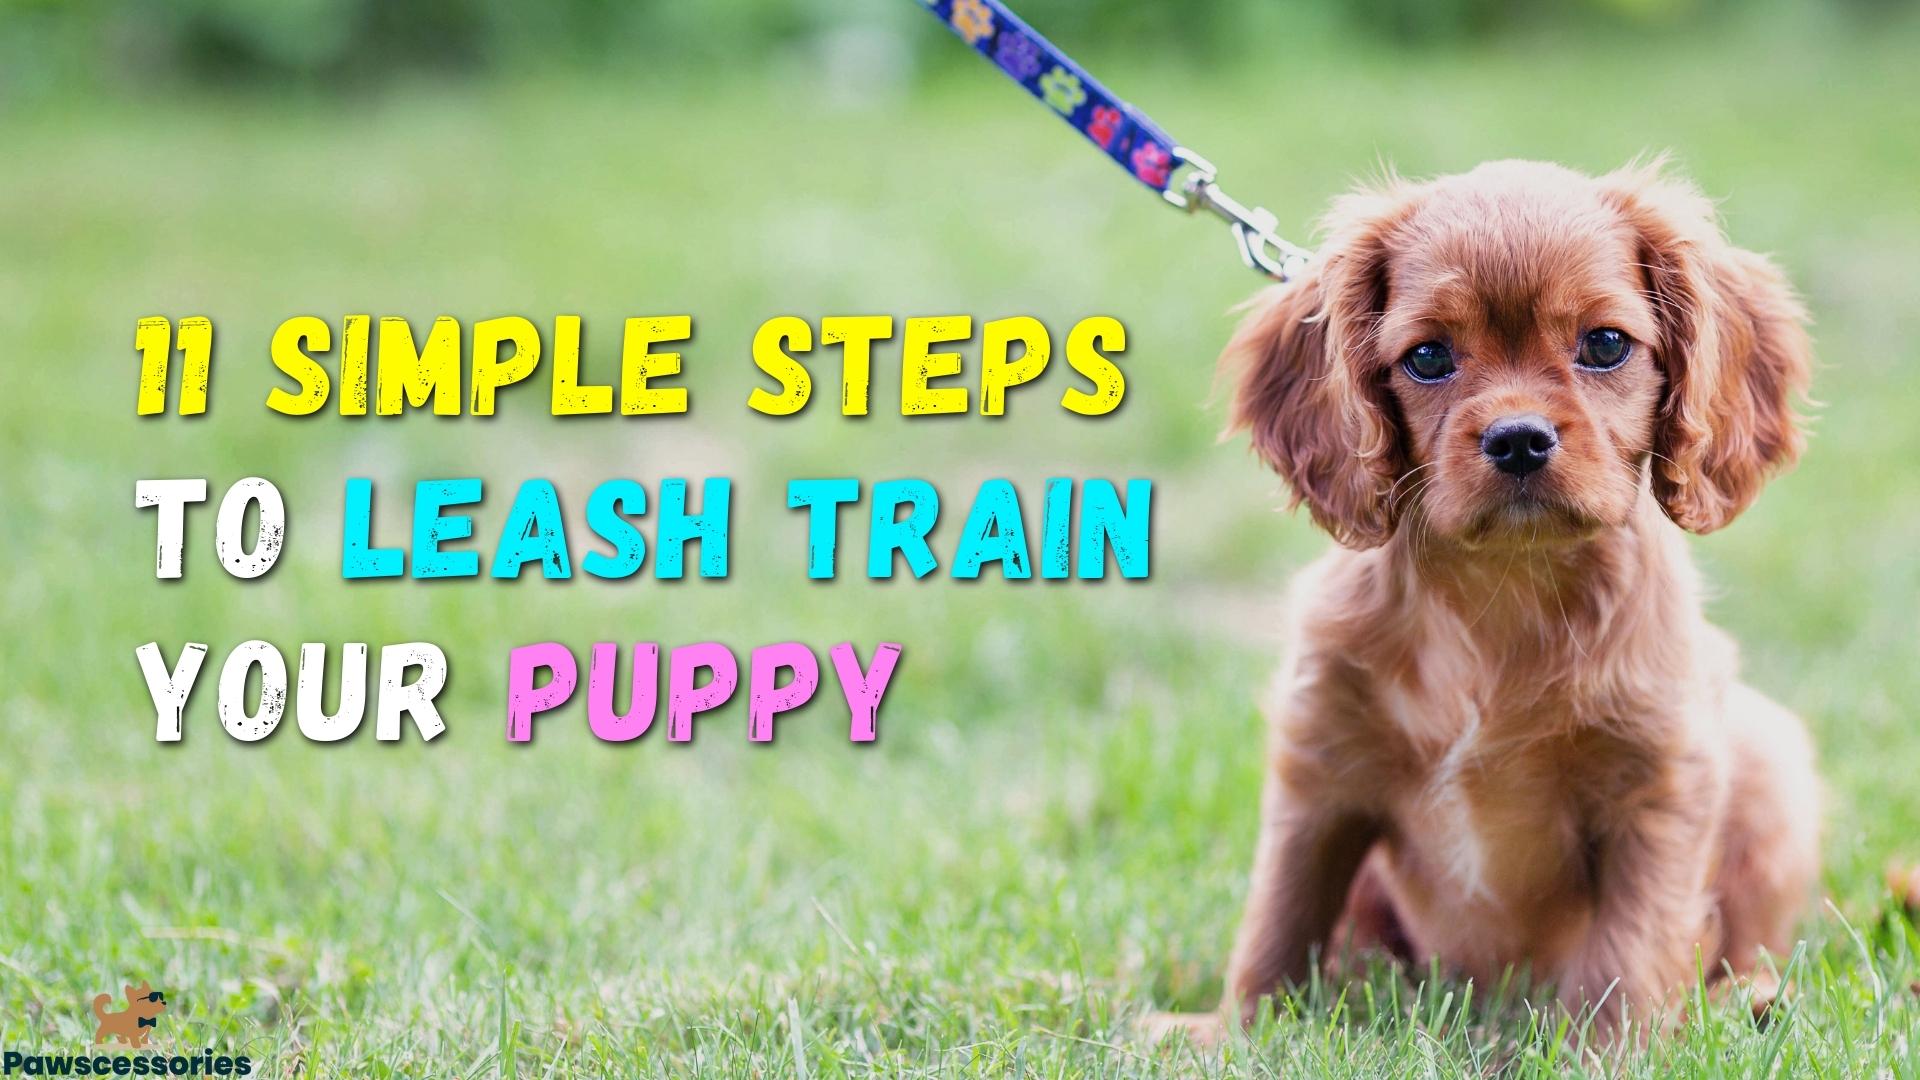 11 Simple Steps To Leash Train A Puppy (#9 Is Key)